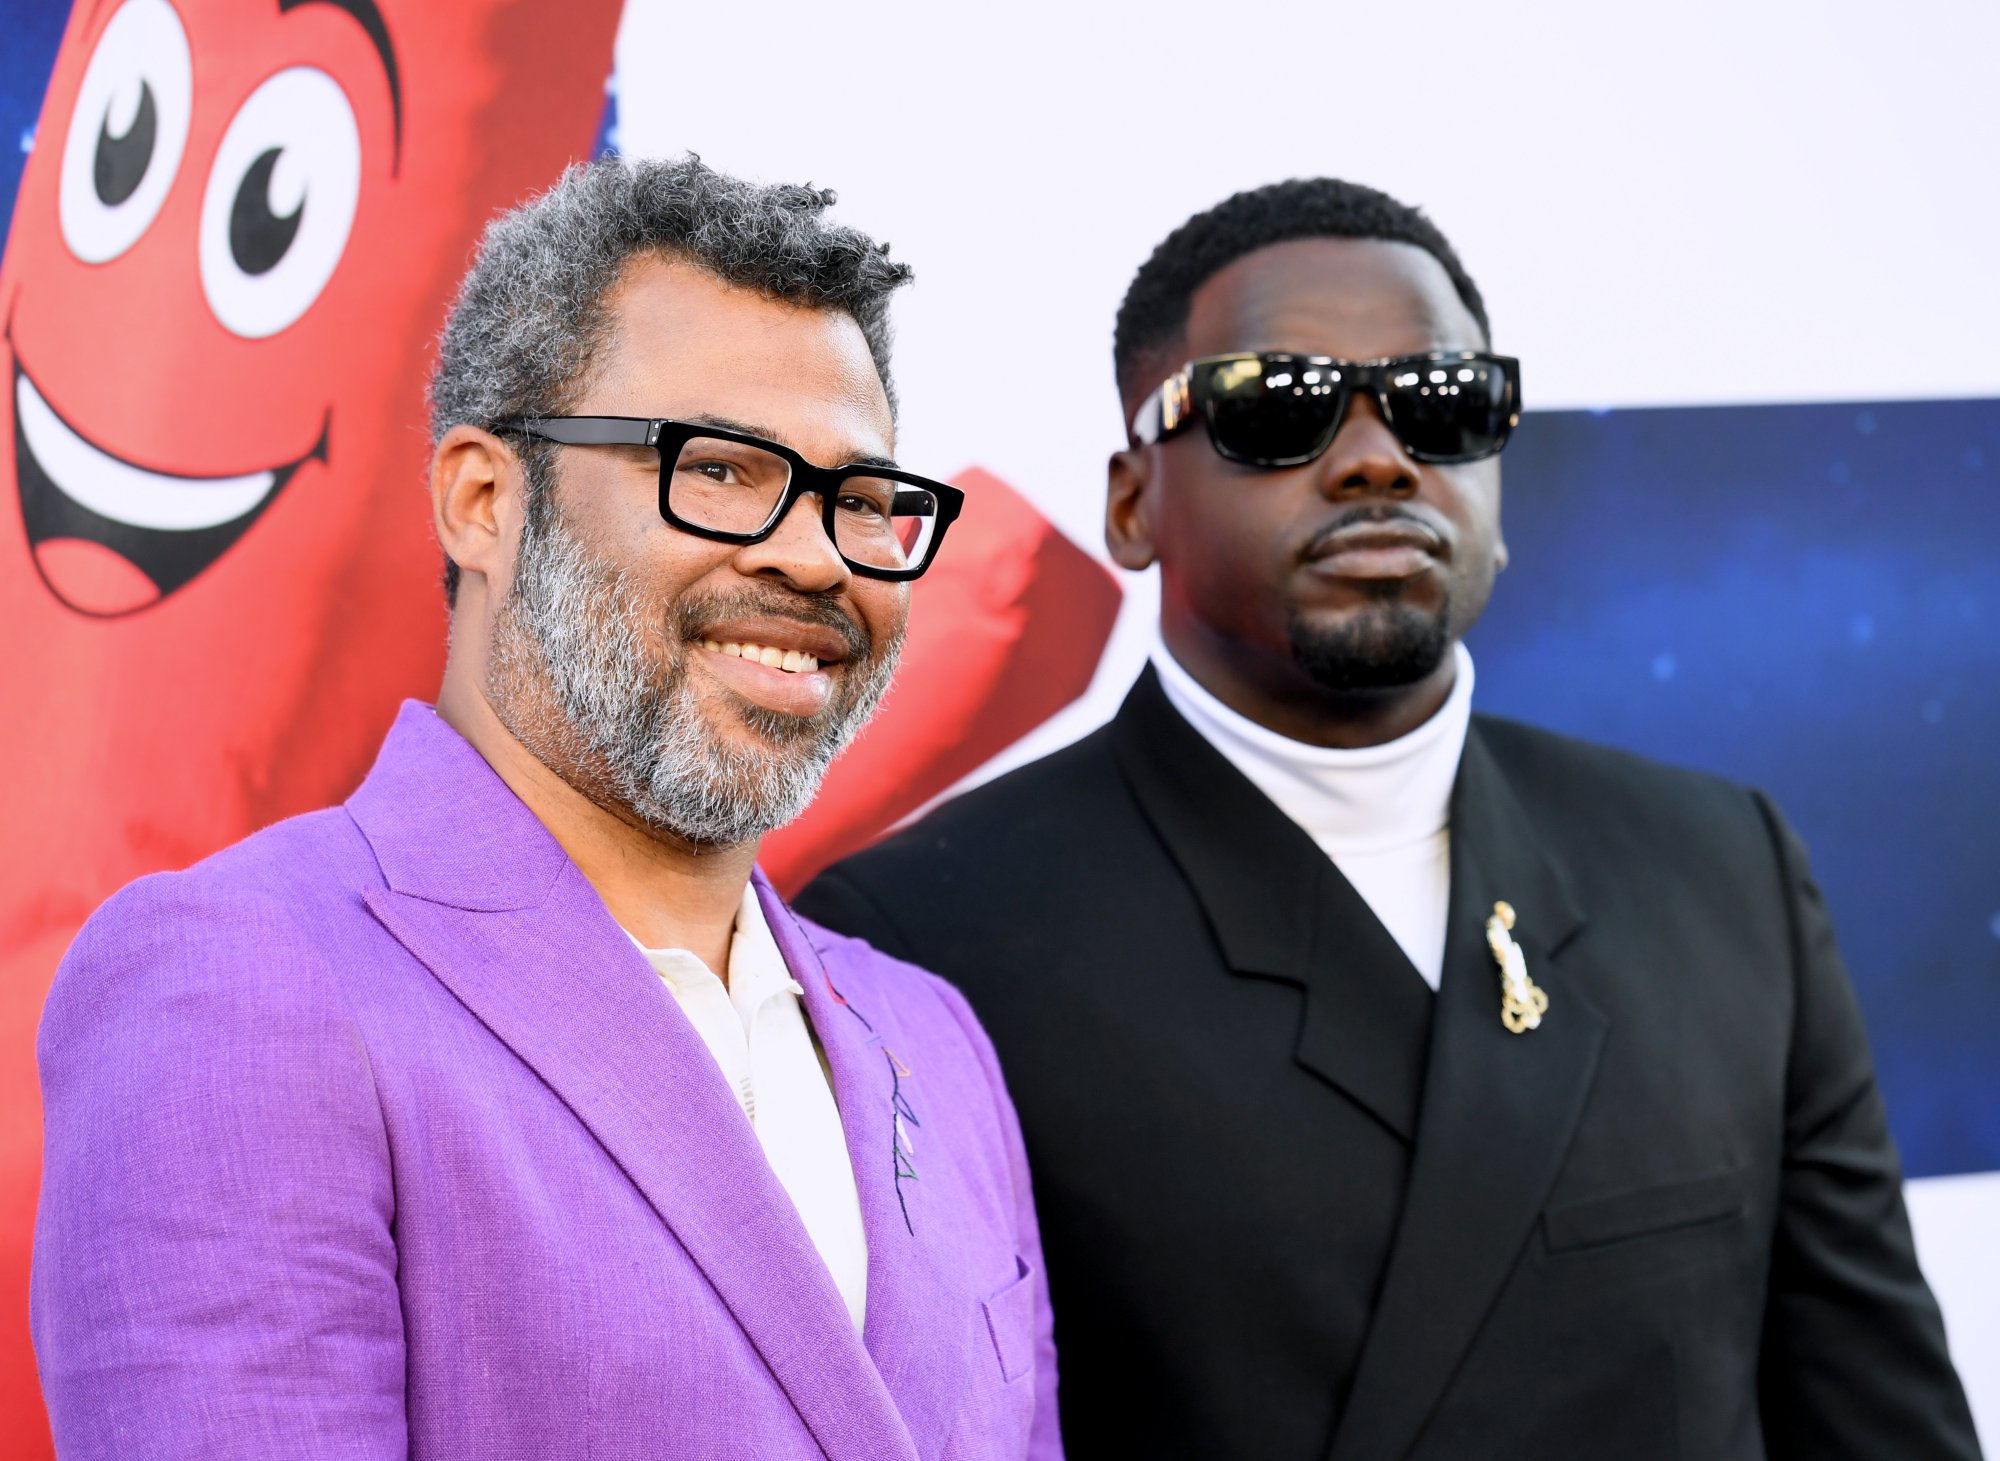 Why Jordan Peele and Daniel Kaluuya Could Be the Next Steven Spielberg and Tom Hanks